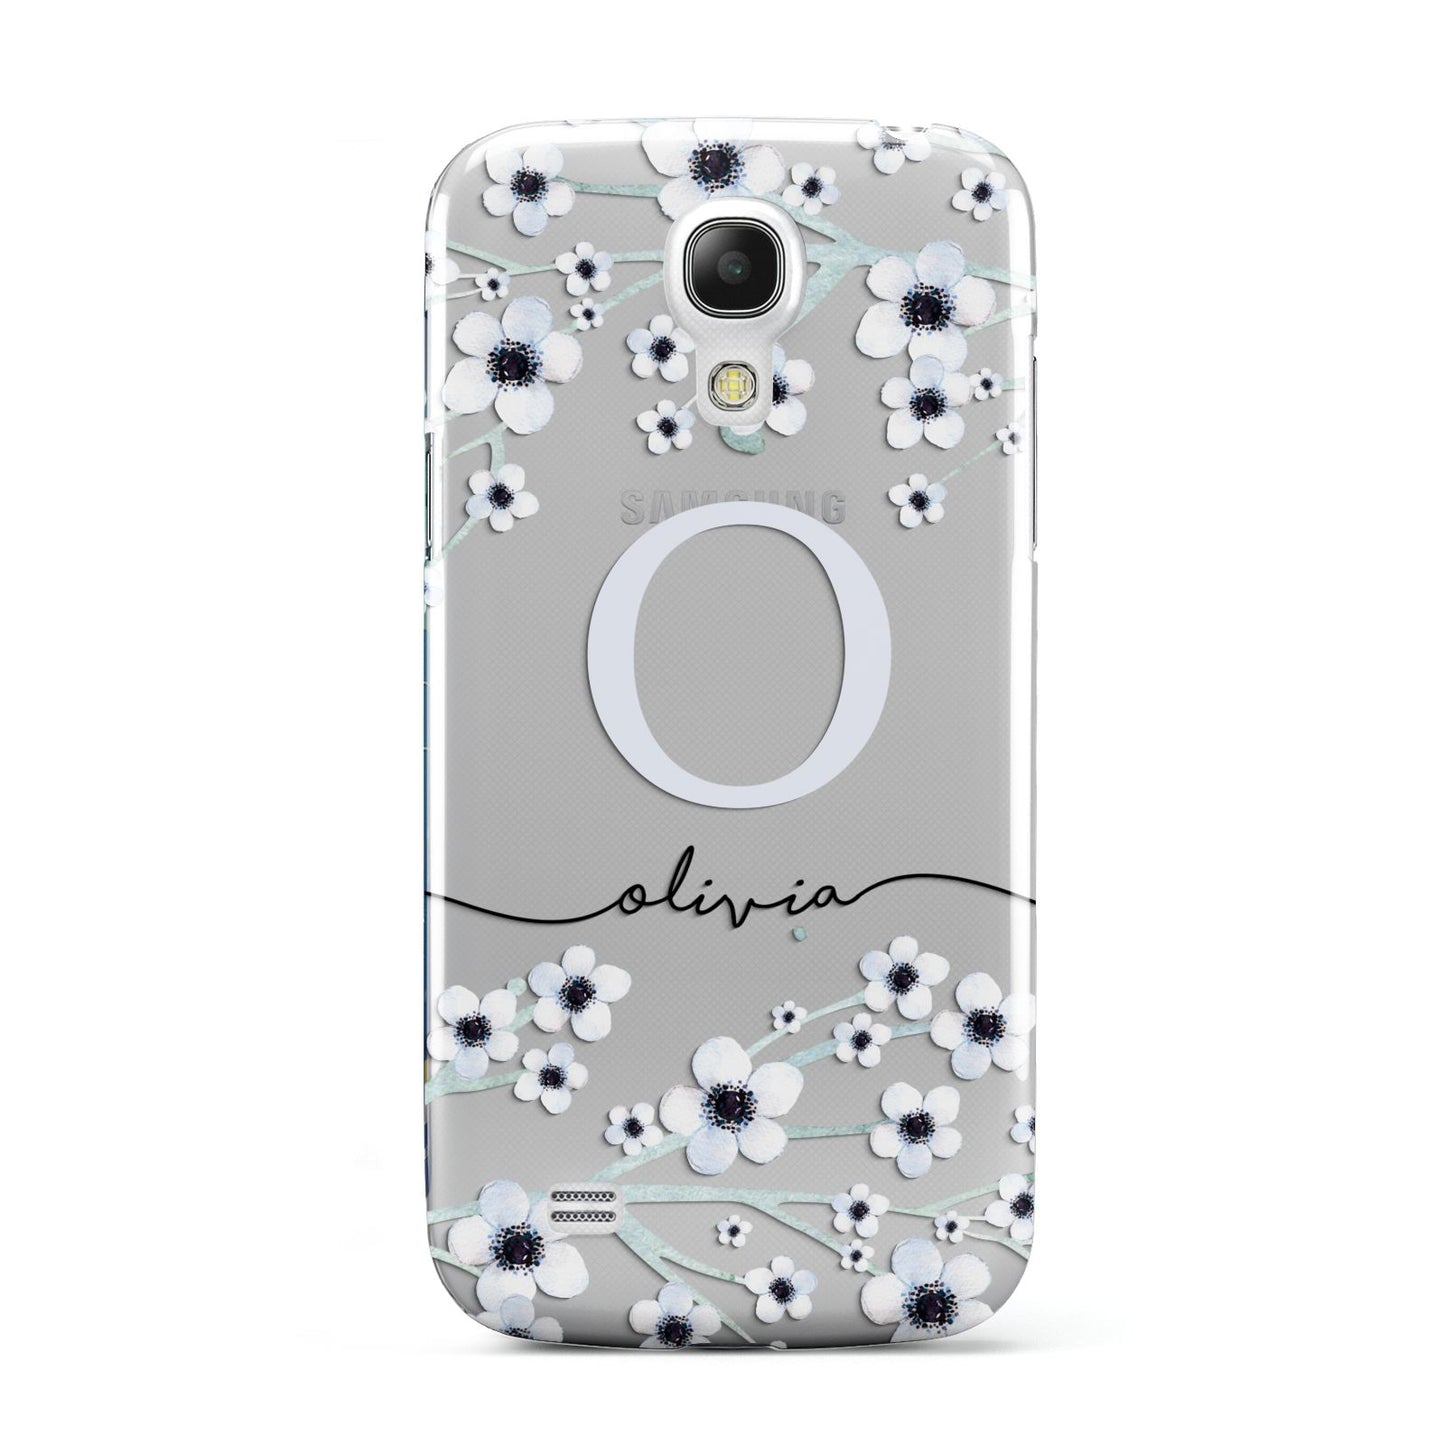 Personalised White Flower Samsung Galaxy S4 Mini Case